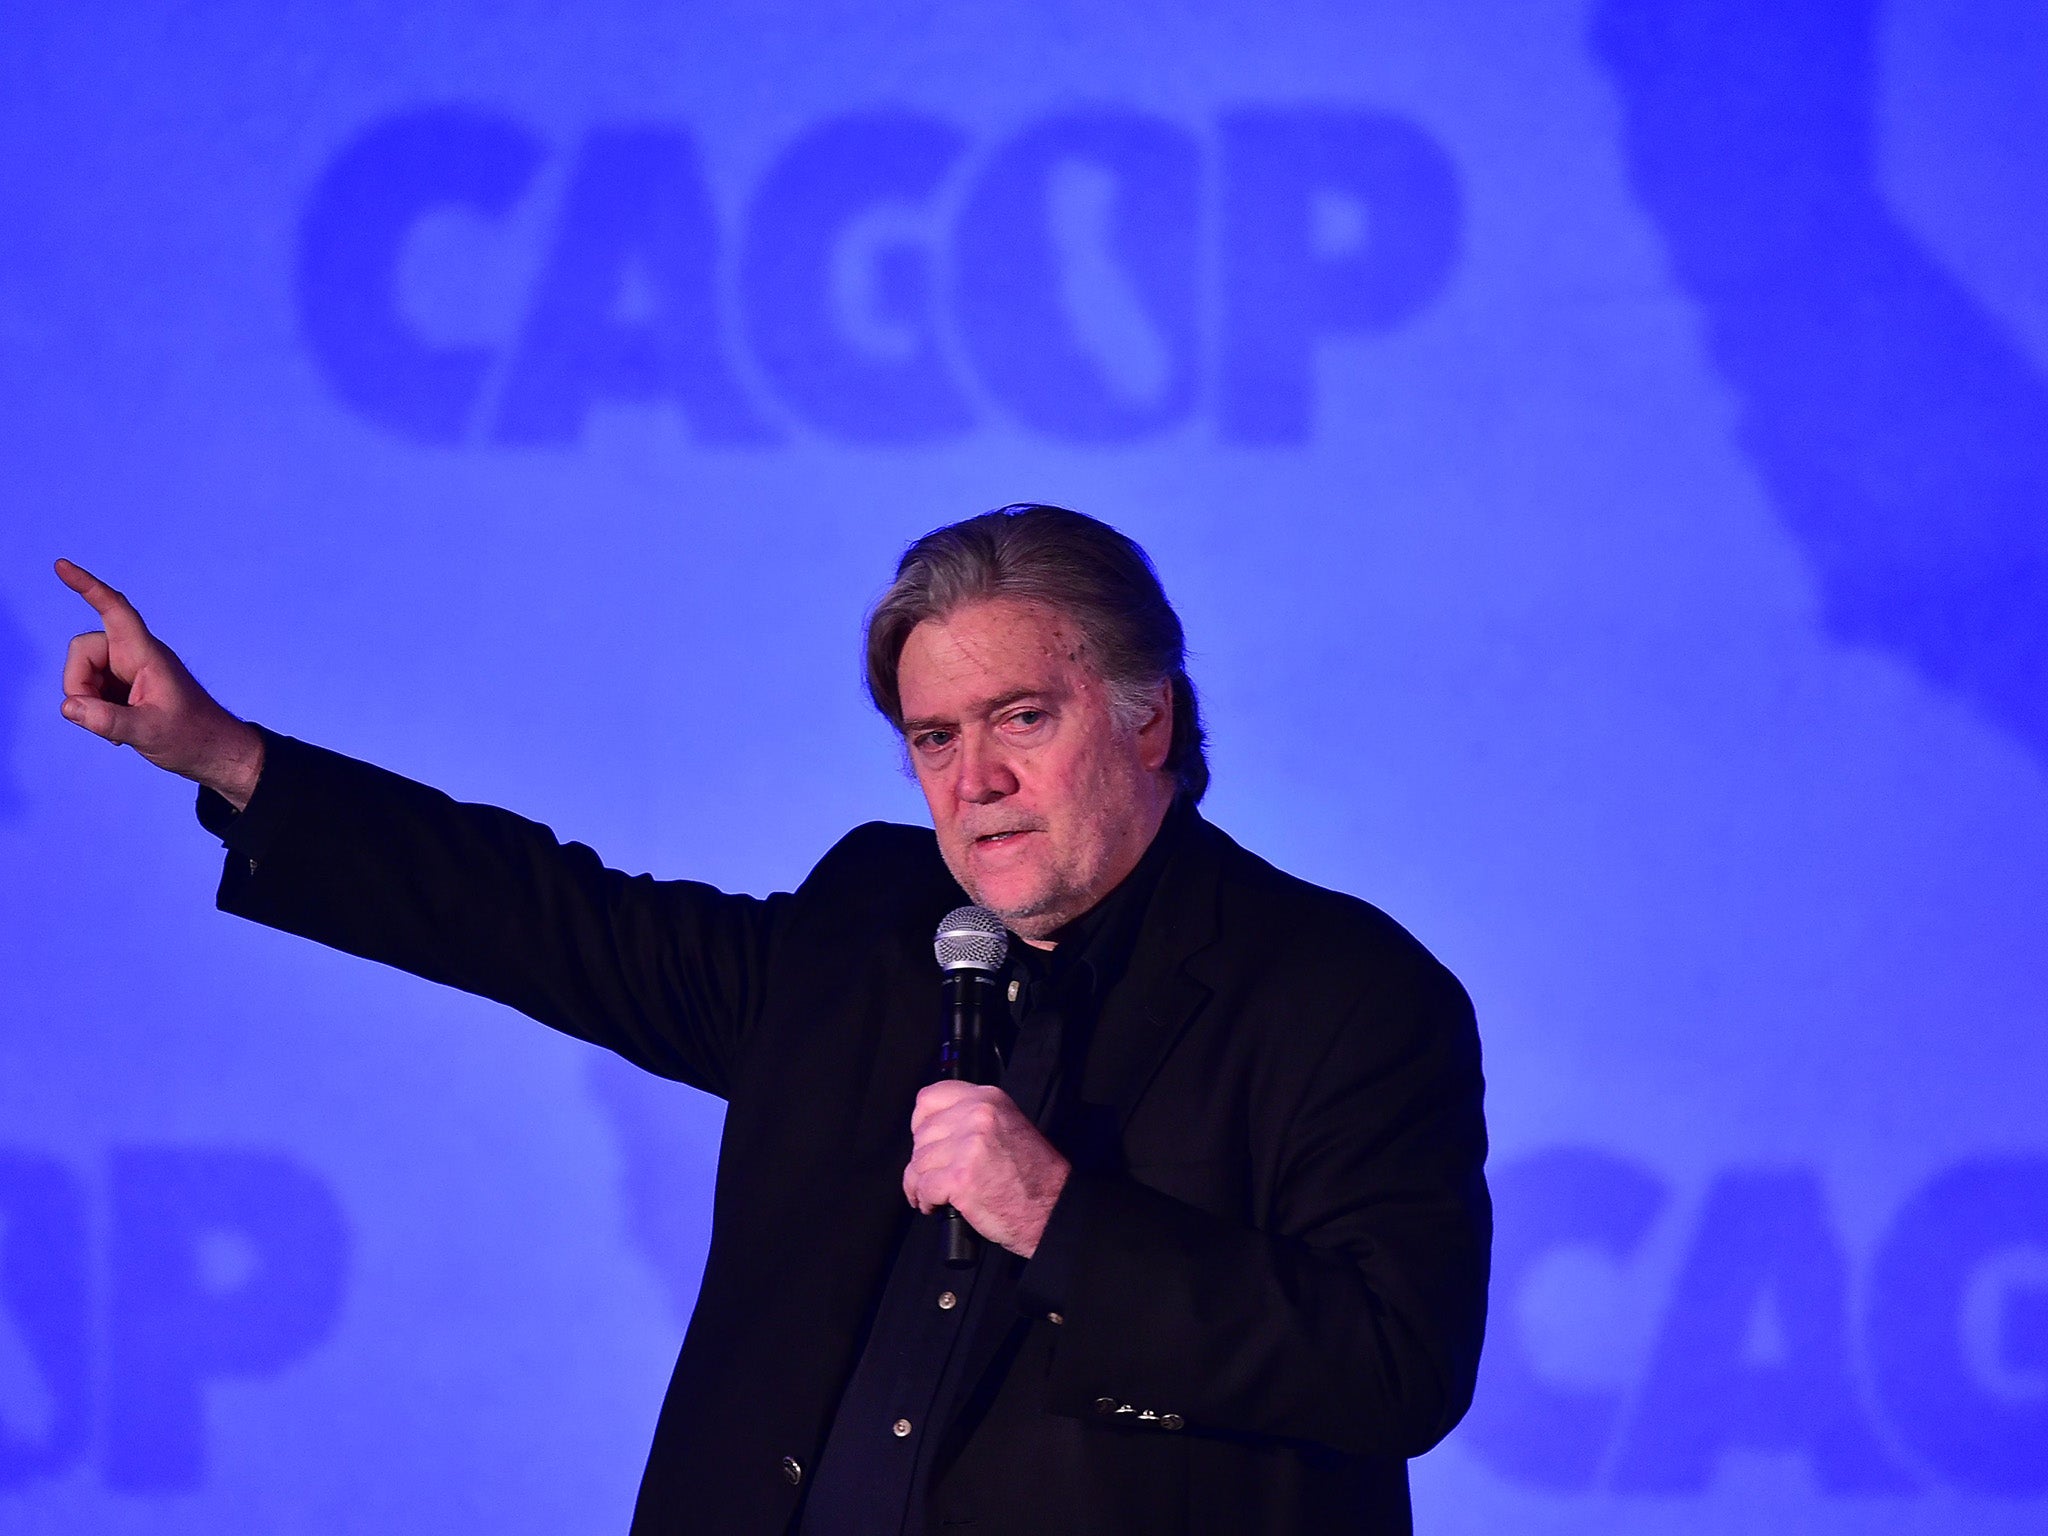 Mr Bannon has made controversial comments about his opponents for years